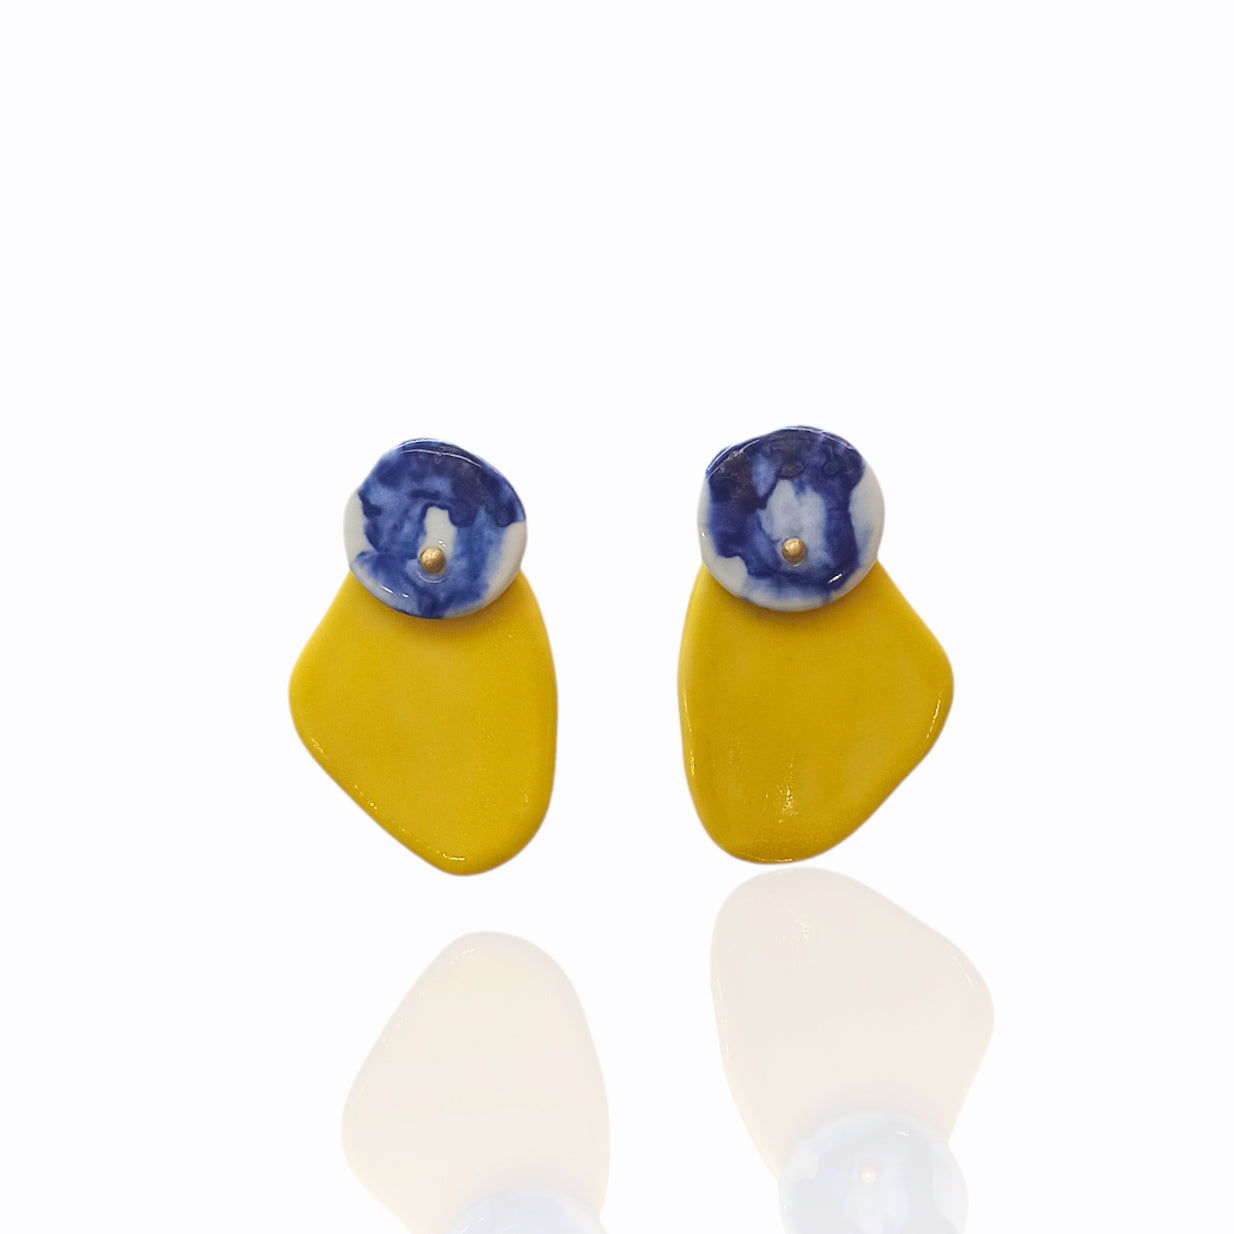 Porcelain stud colorful earrings. Yellow and blue porcelain earrings